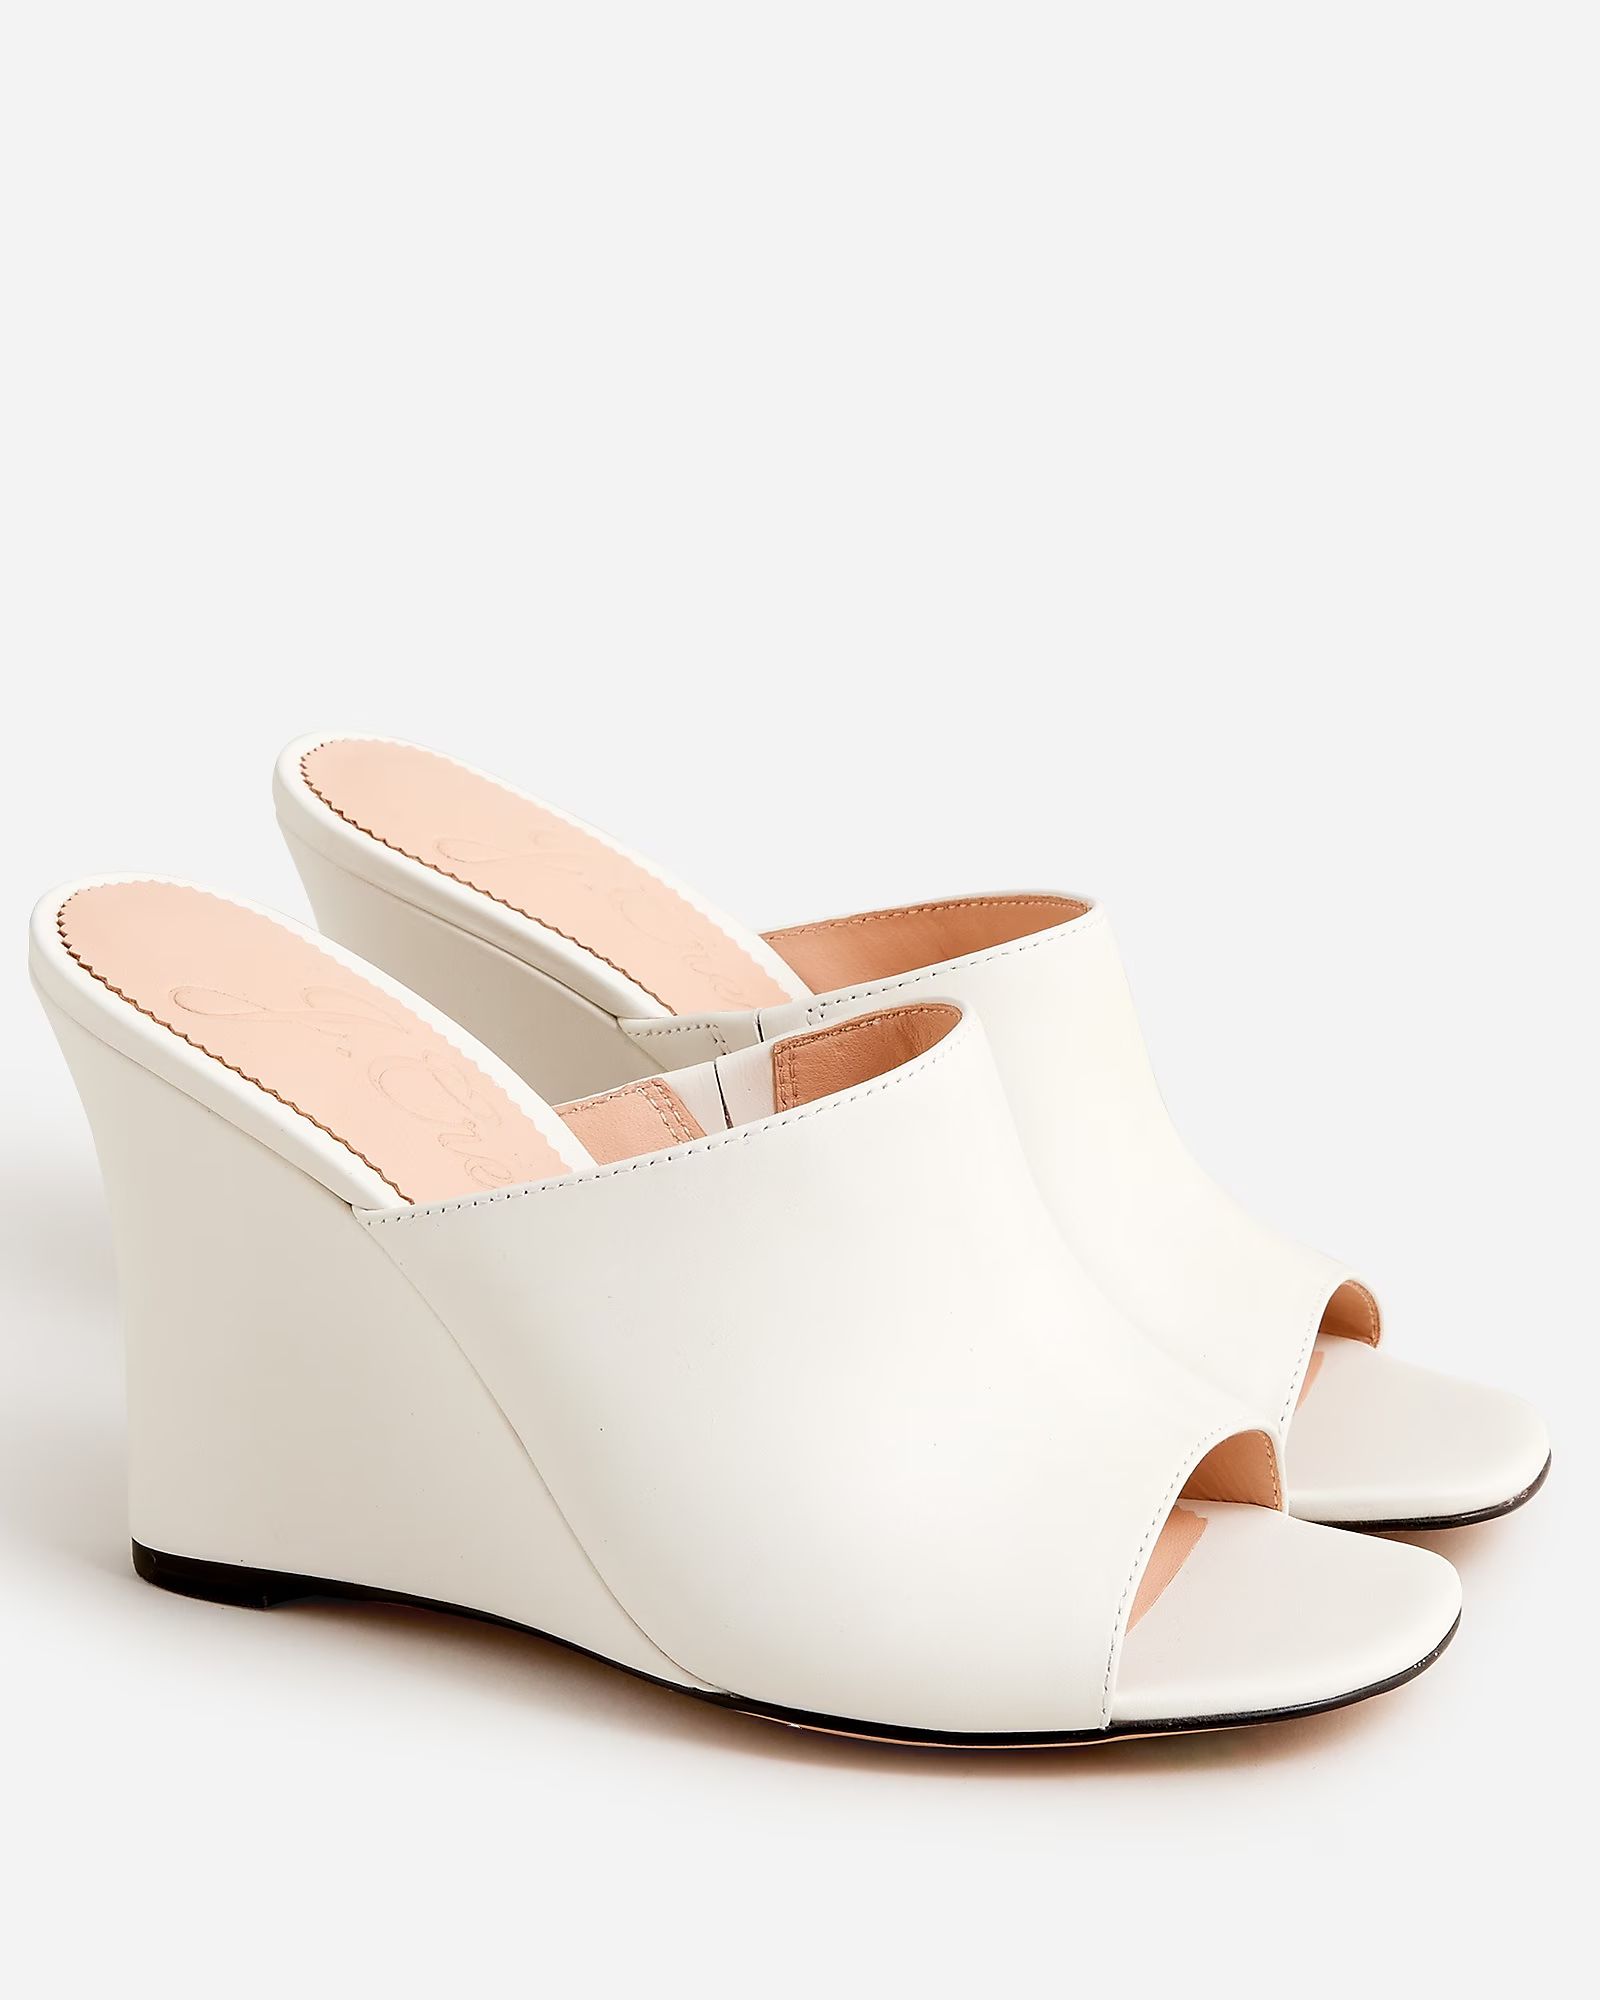 Bianca wedge sandals in leather | J.Crew US